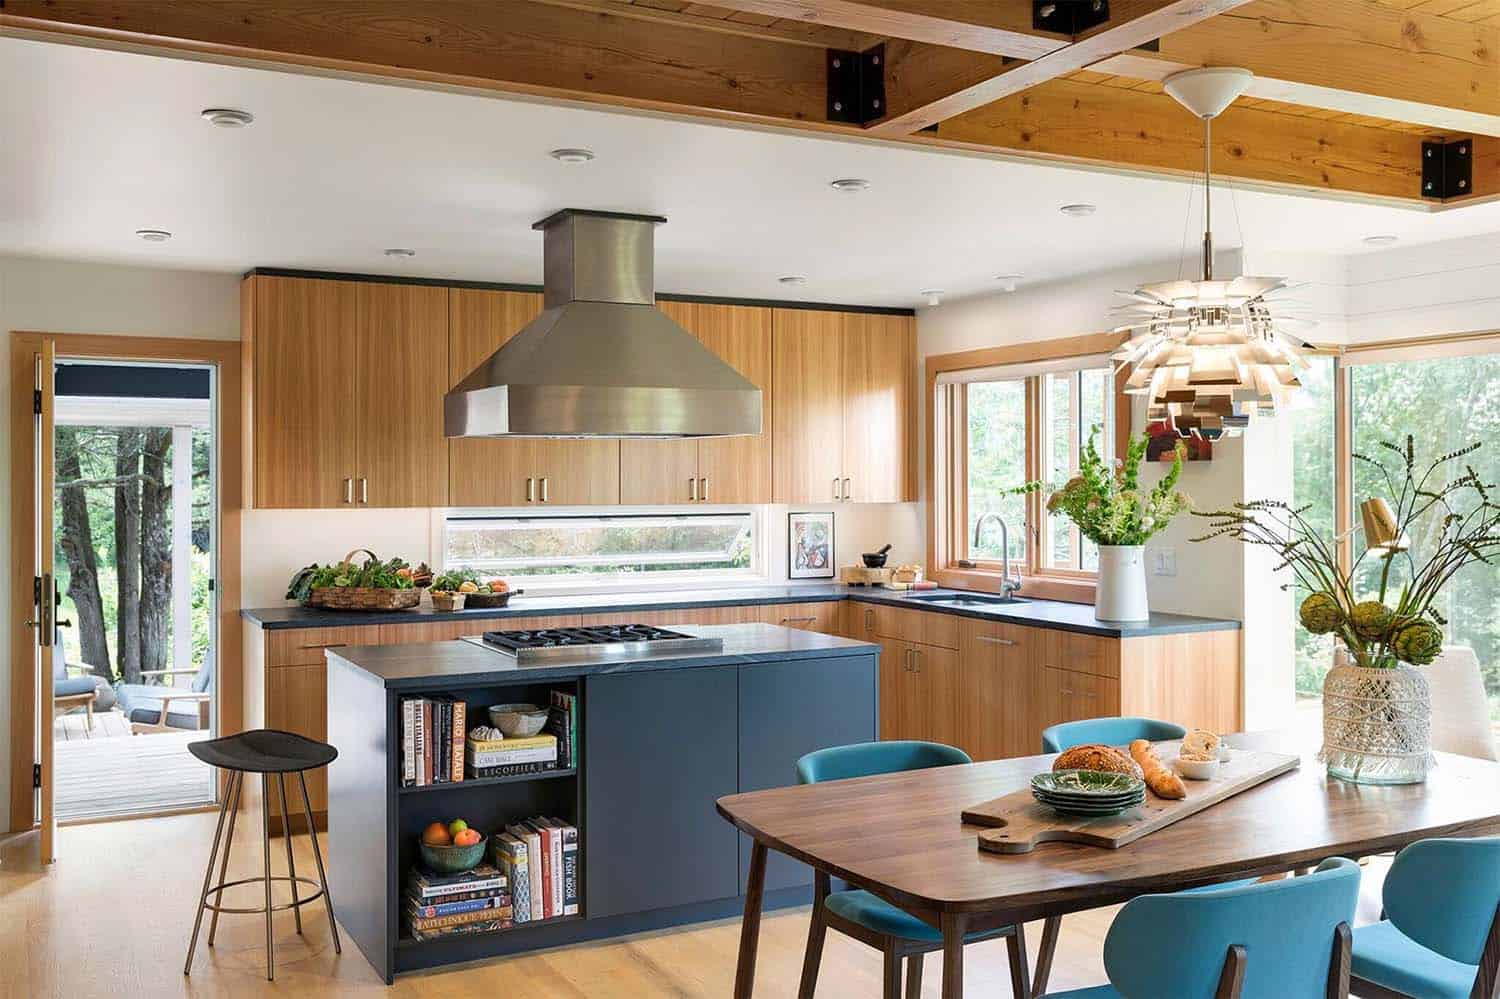 A Minnesota cabin gets beautifully remodeled into a midcentury modern haven